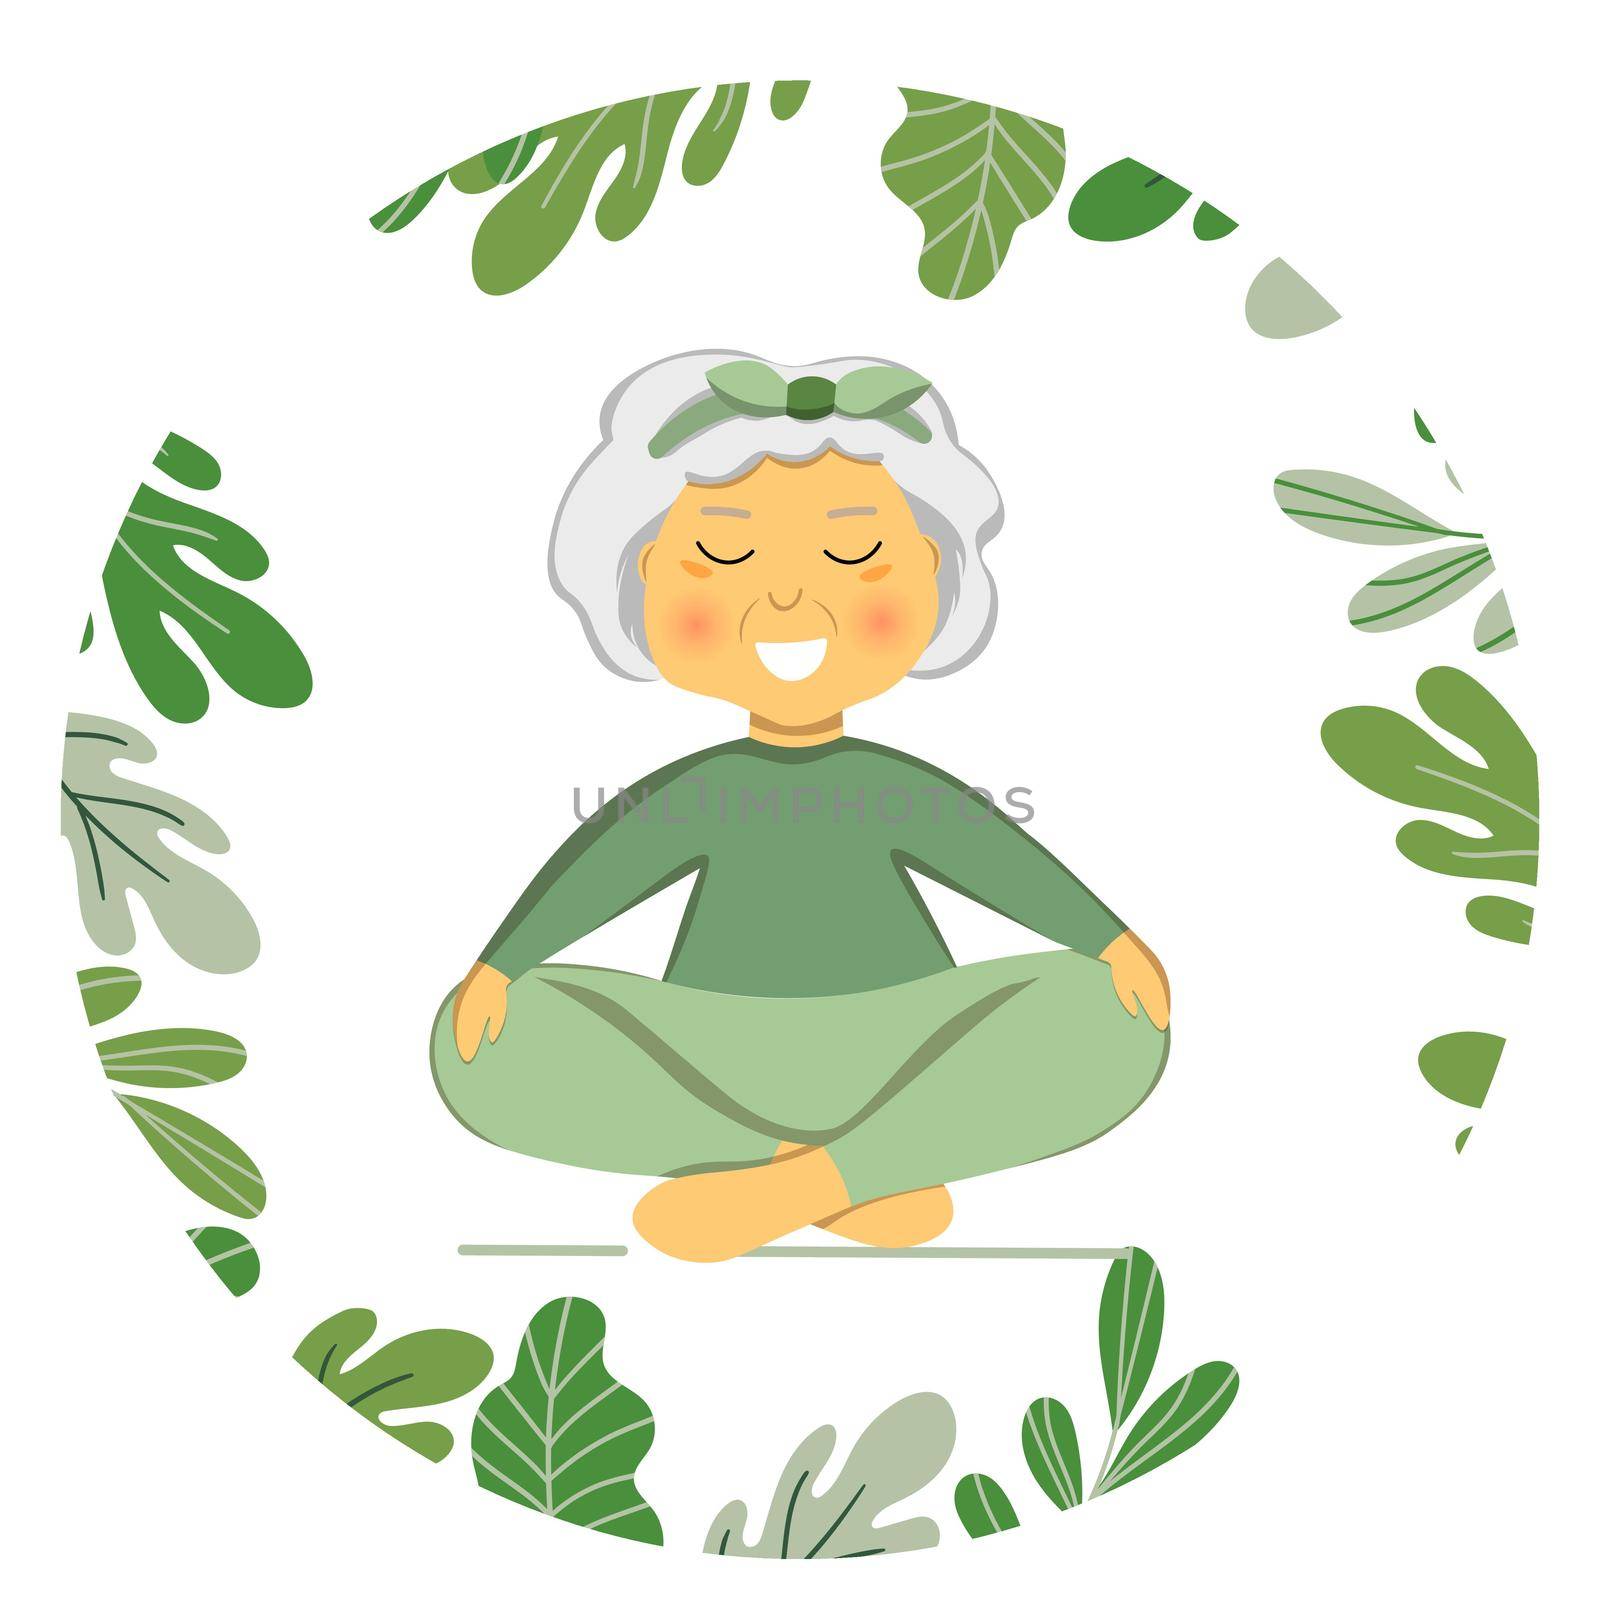 Sporty Granny does Yoga. Old person. Vector colorful cartoon illustration. Senior woman in pose yoga. Exercising for better health. Isolated flat image. Grandma. Grandmother character. by allaku